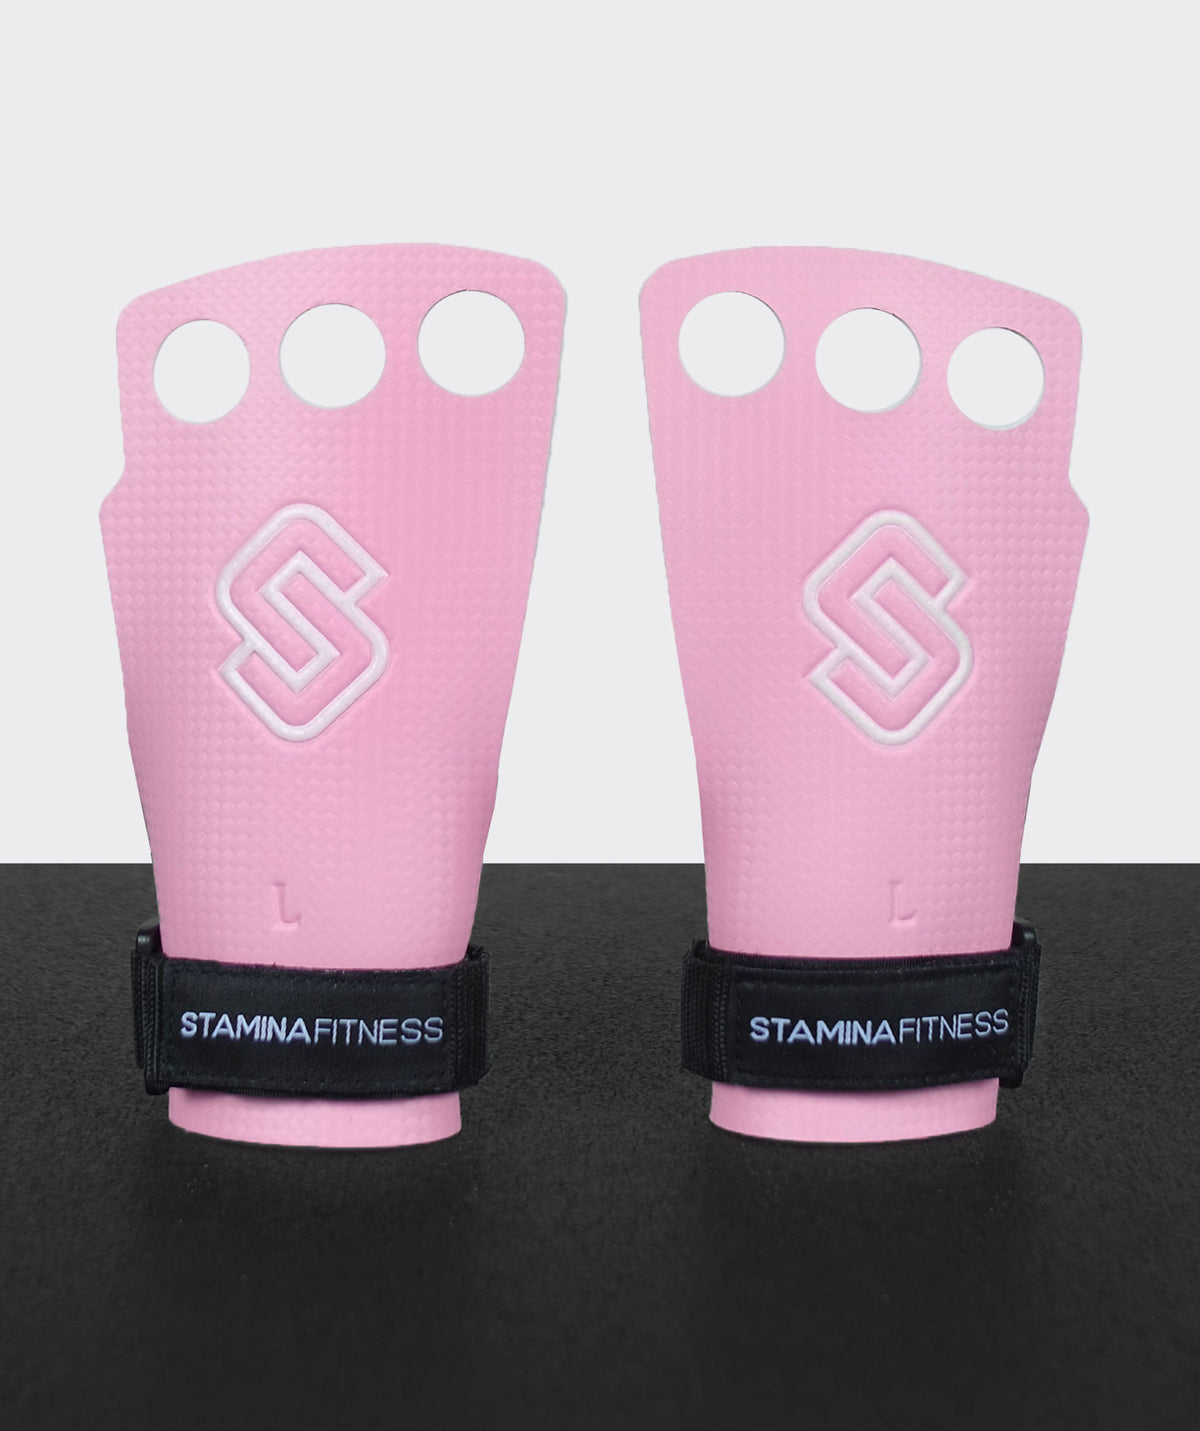 Paracalli CARBON Full Cover Pink - Stamina Fitness